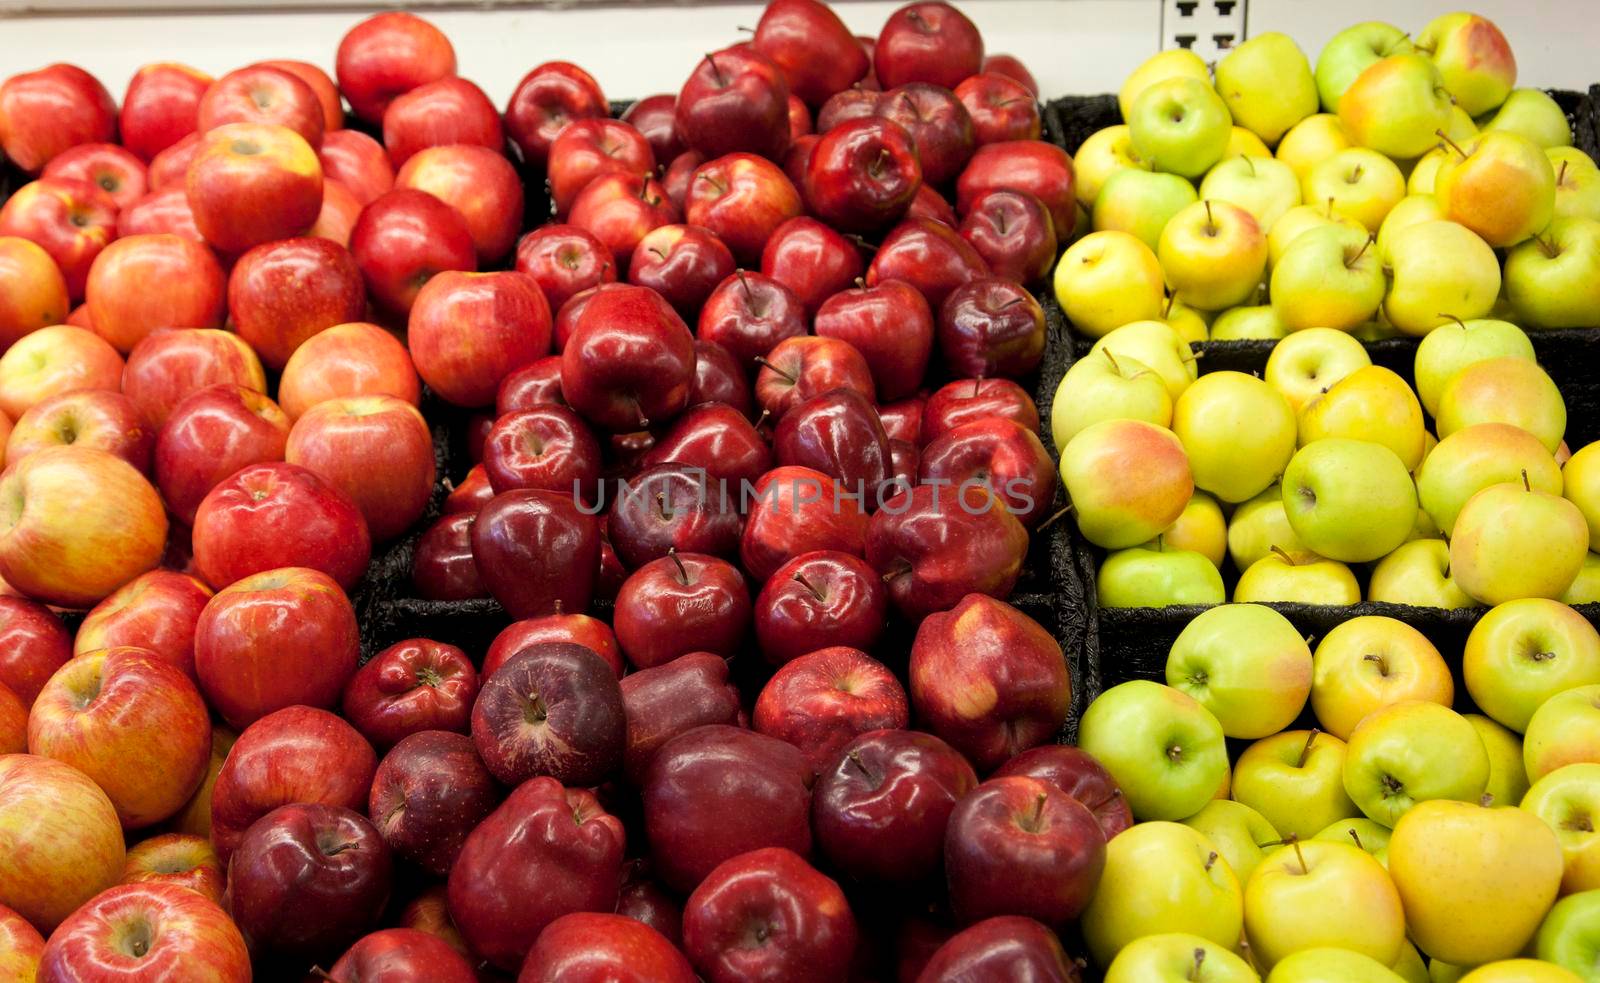 a variety of apple types and shapes at the supermarket